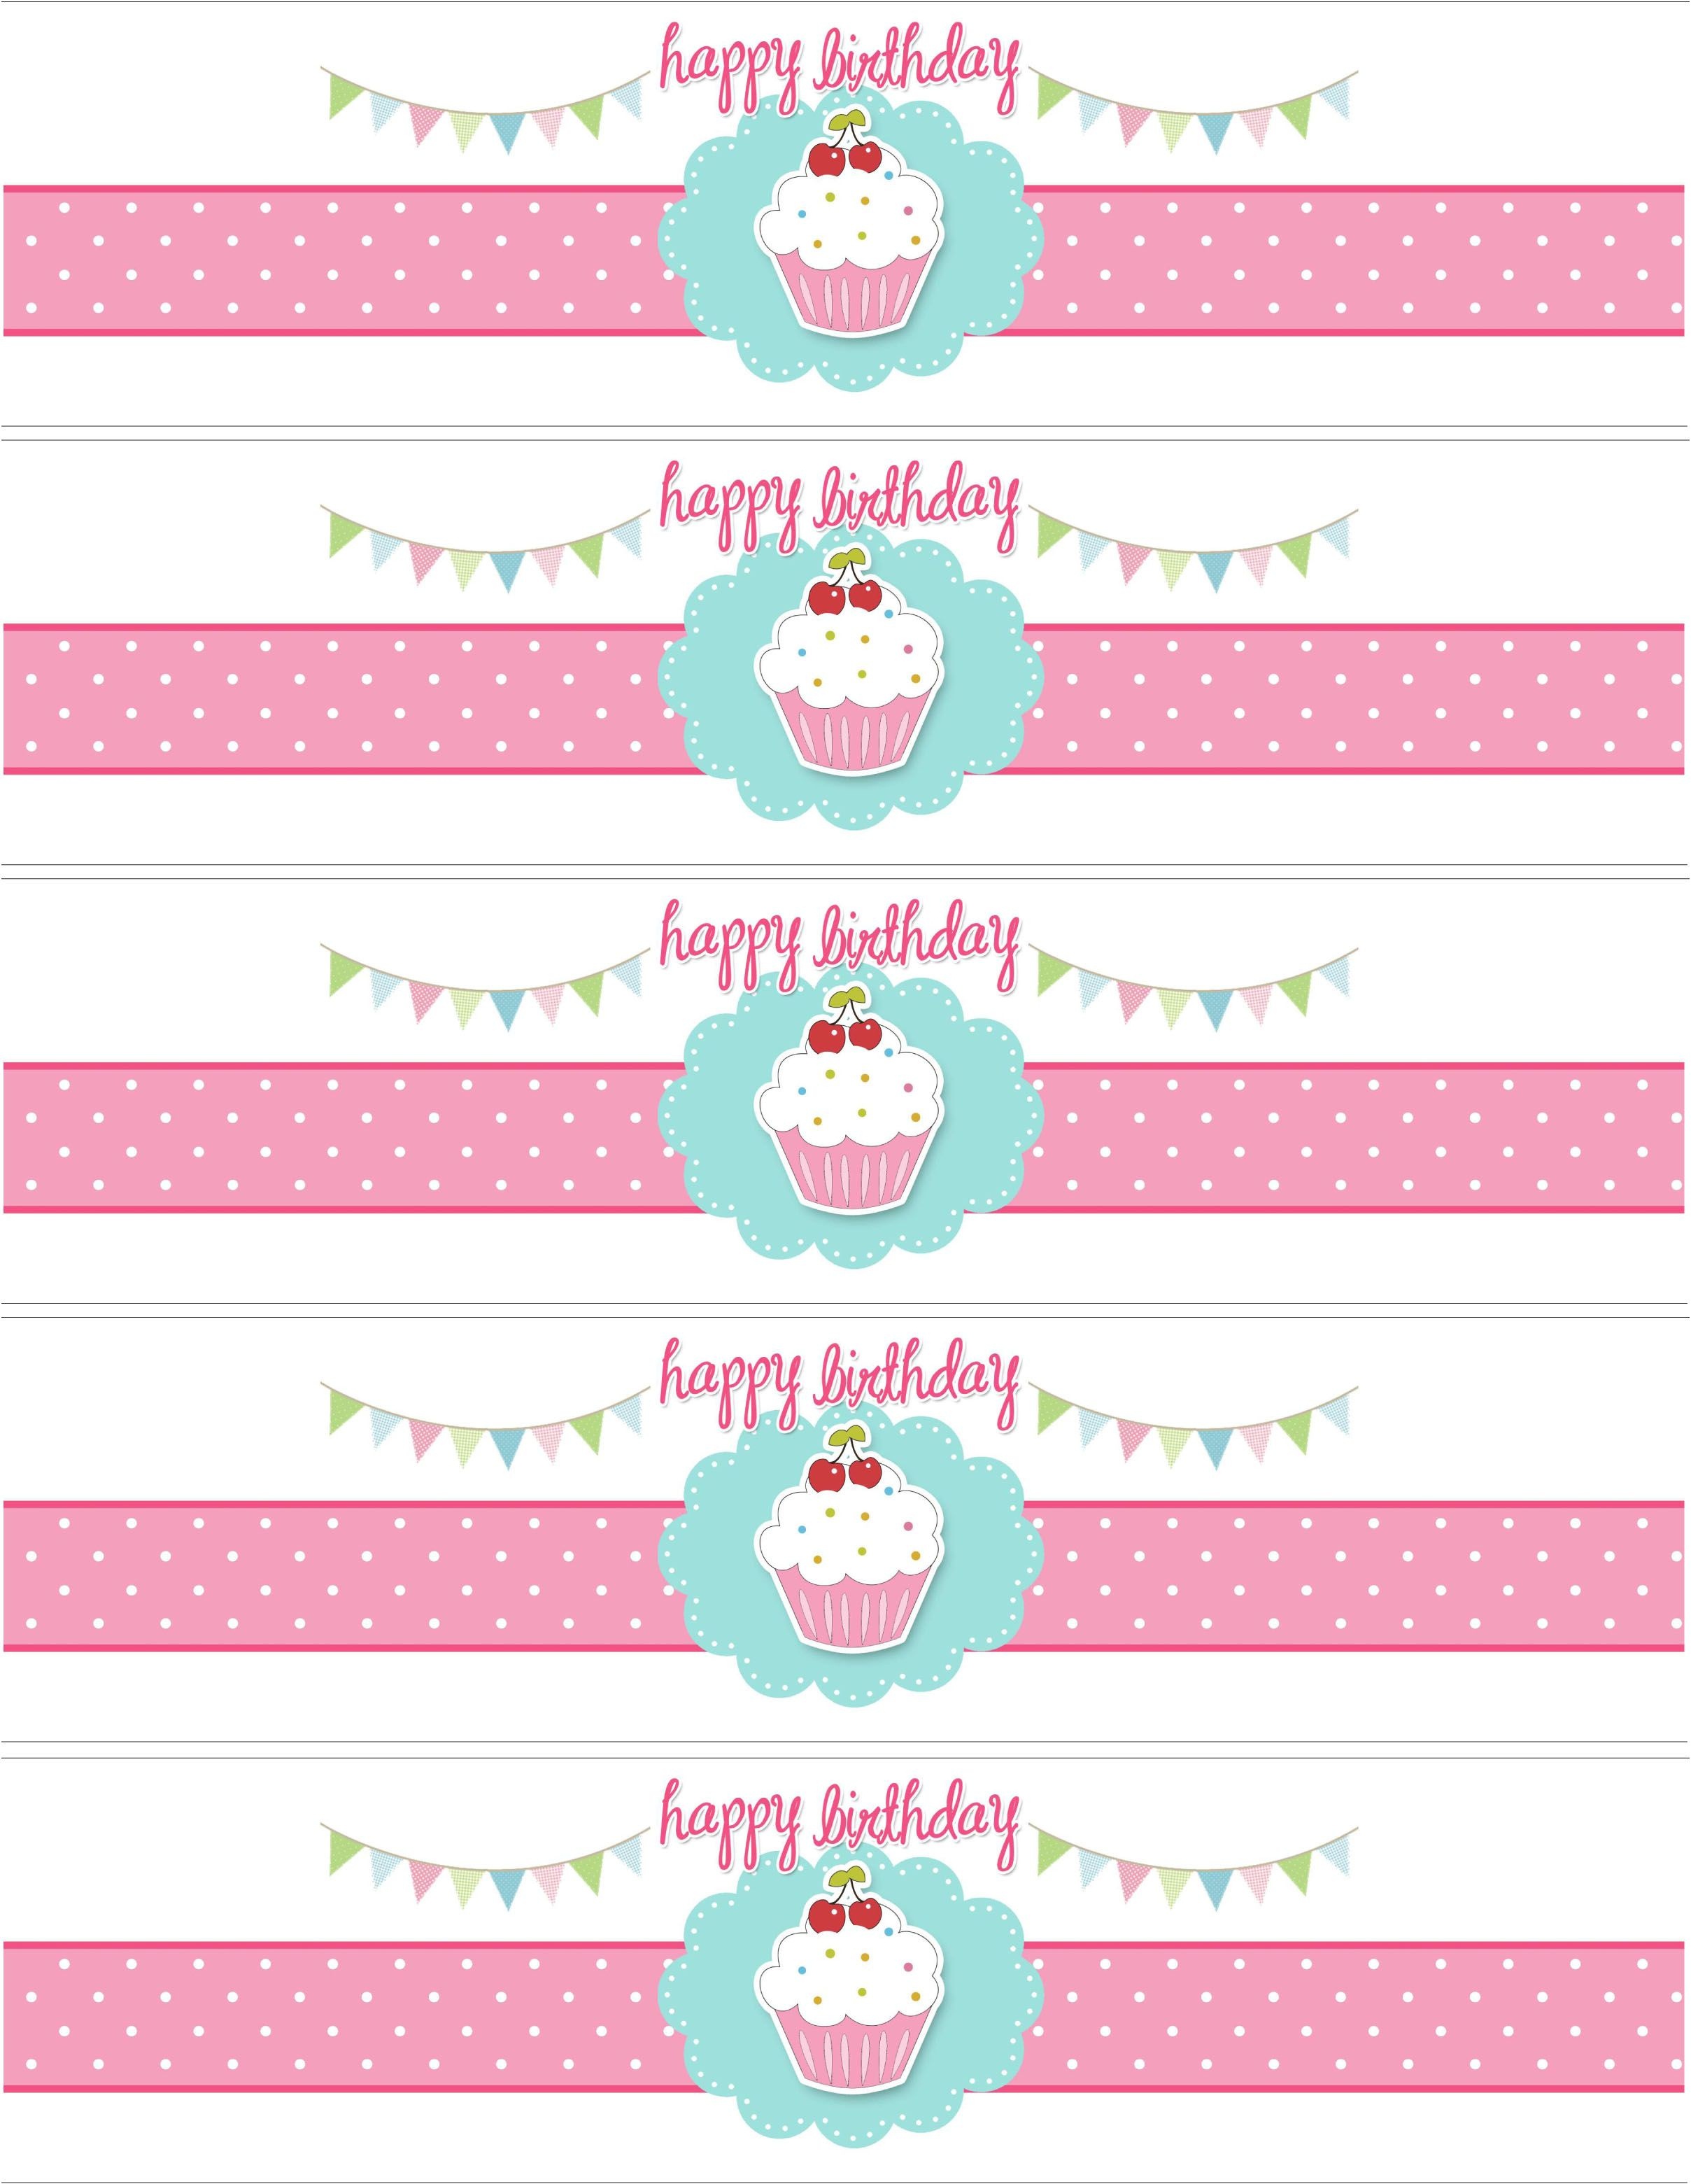 Cupcake Birthday Party With Free Printables | Party Ideas - Free Printable Water Bottle Label Template